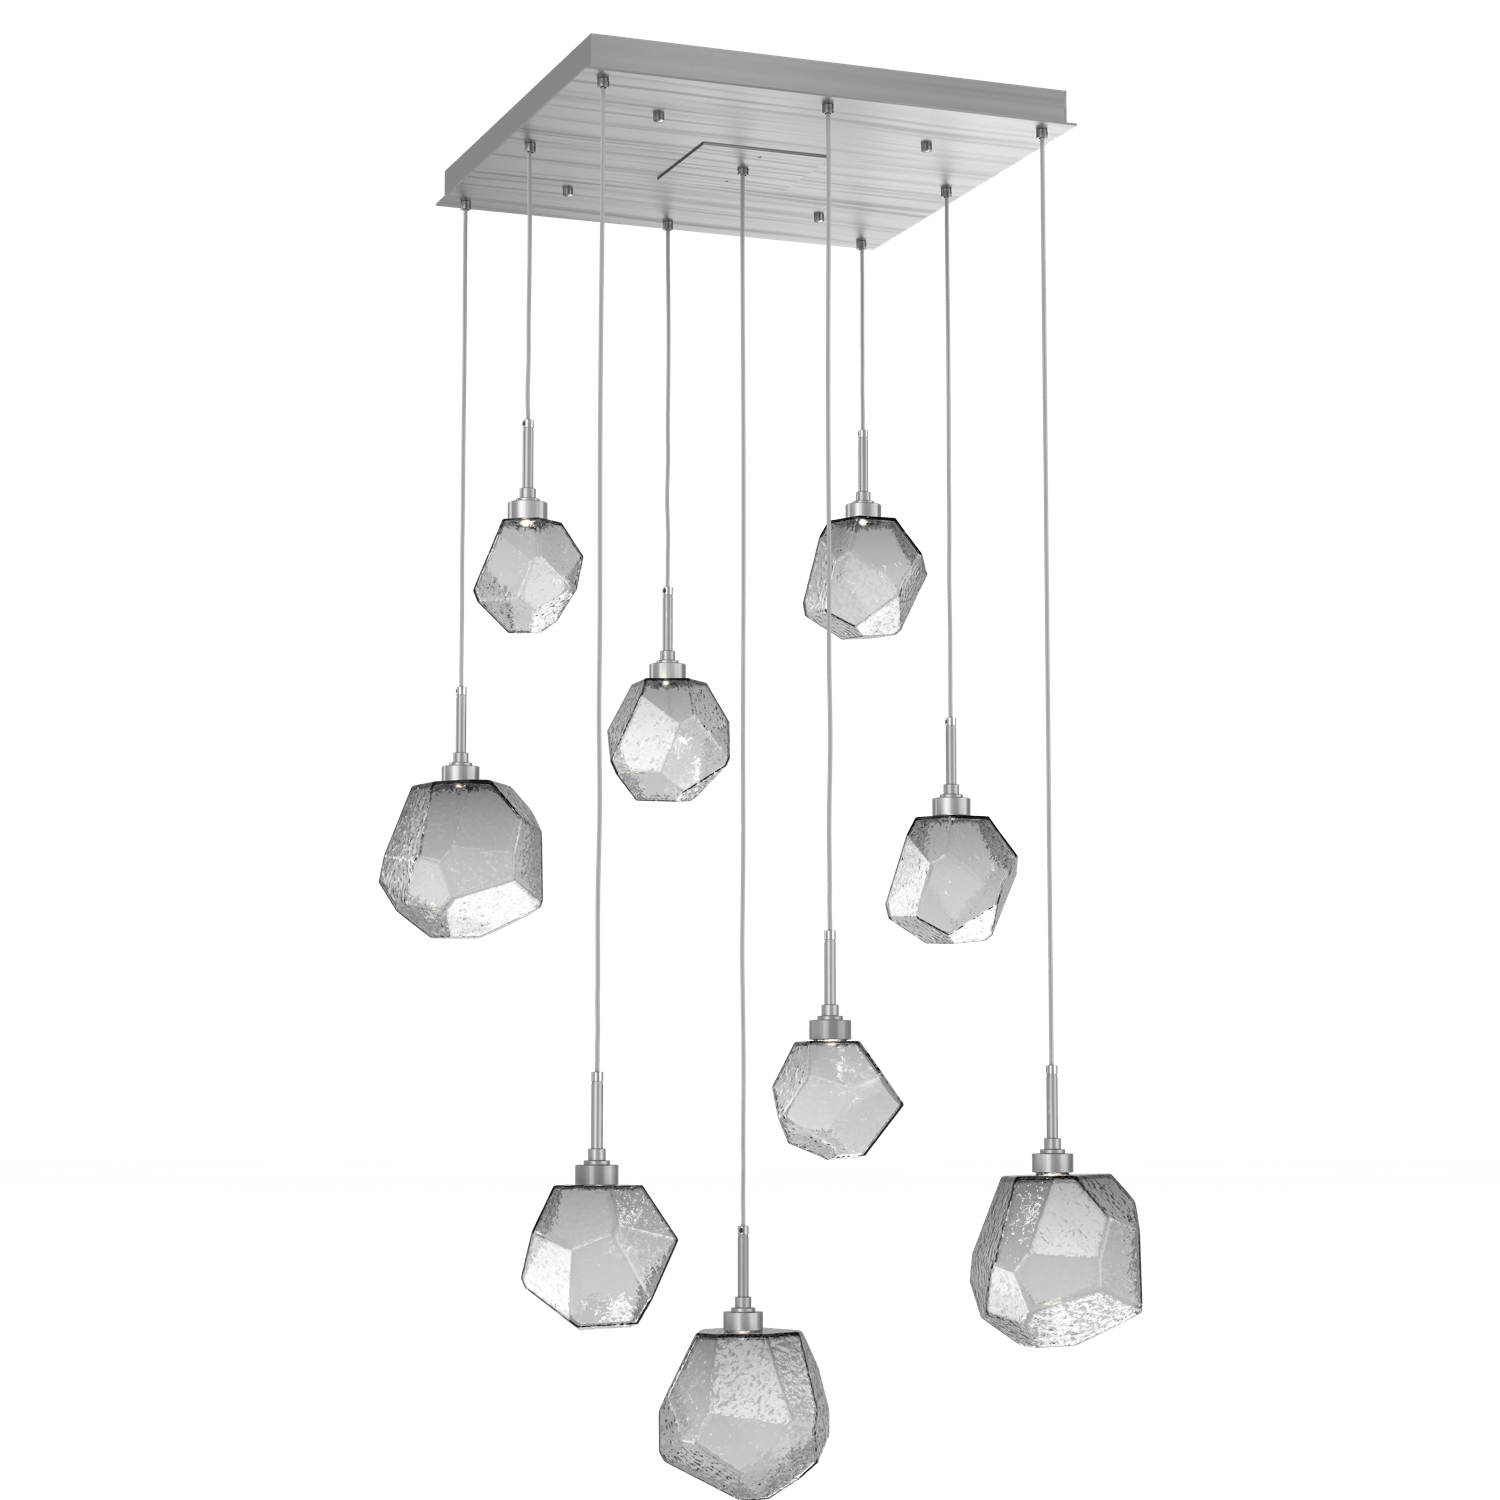 CHB0039-09-SN-S-Hammerton-Studio-Gem-9-light-square-pendant-chandelier-with-satin-nickel-finish-and-smoke-blown-glass-shades-and-LED-lamping